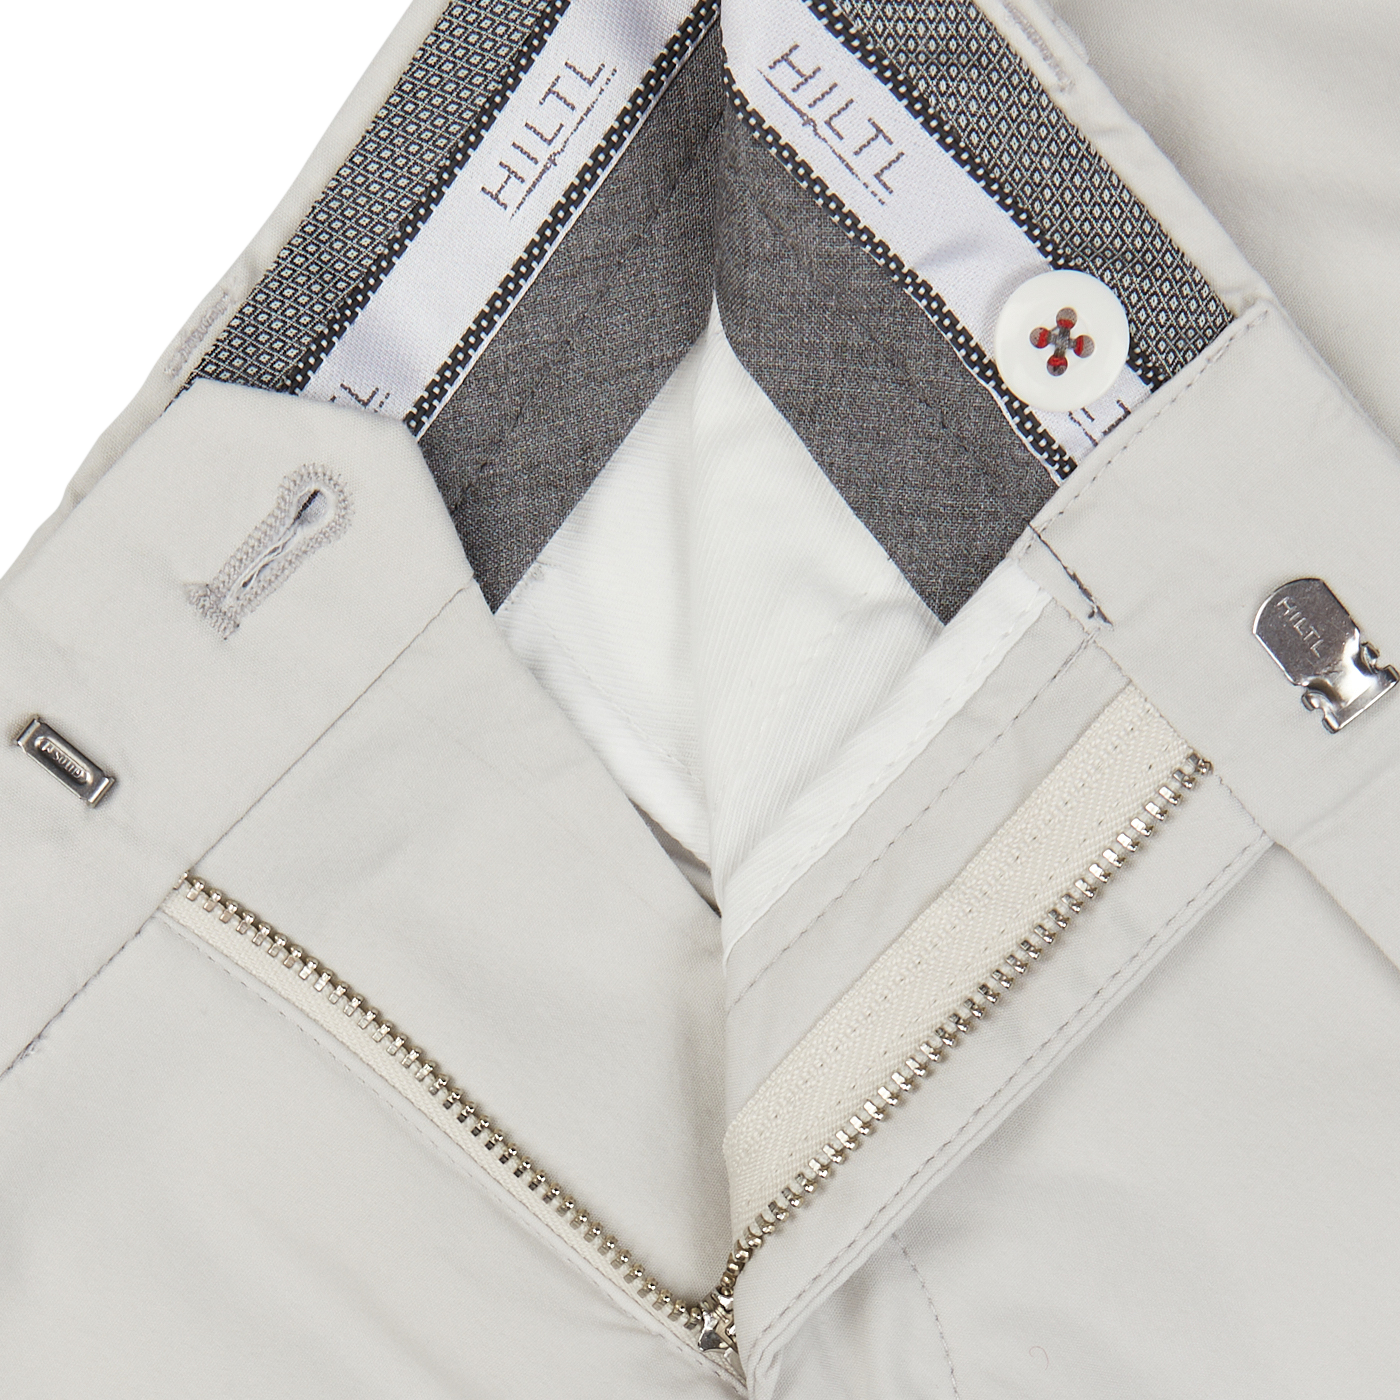 Close-up view of Cream Beige Cotton Nylon Slim Chinos by Hiltl with zipper details and a branded inner lining.